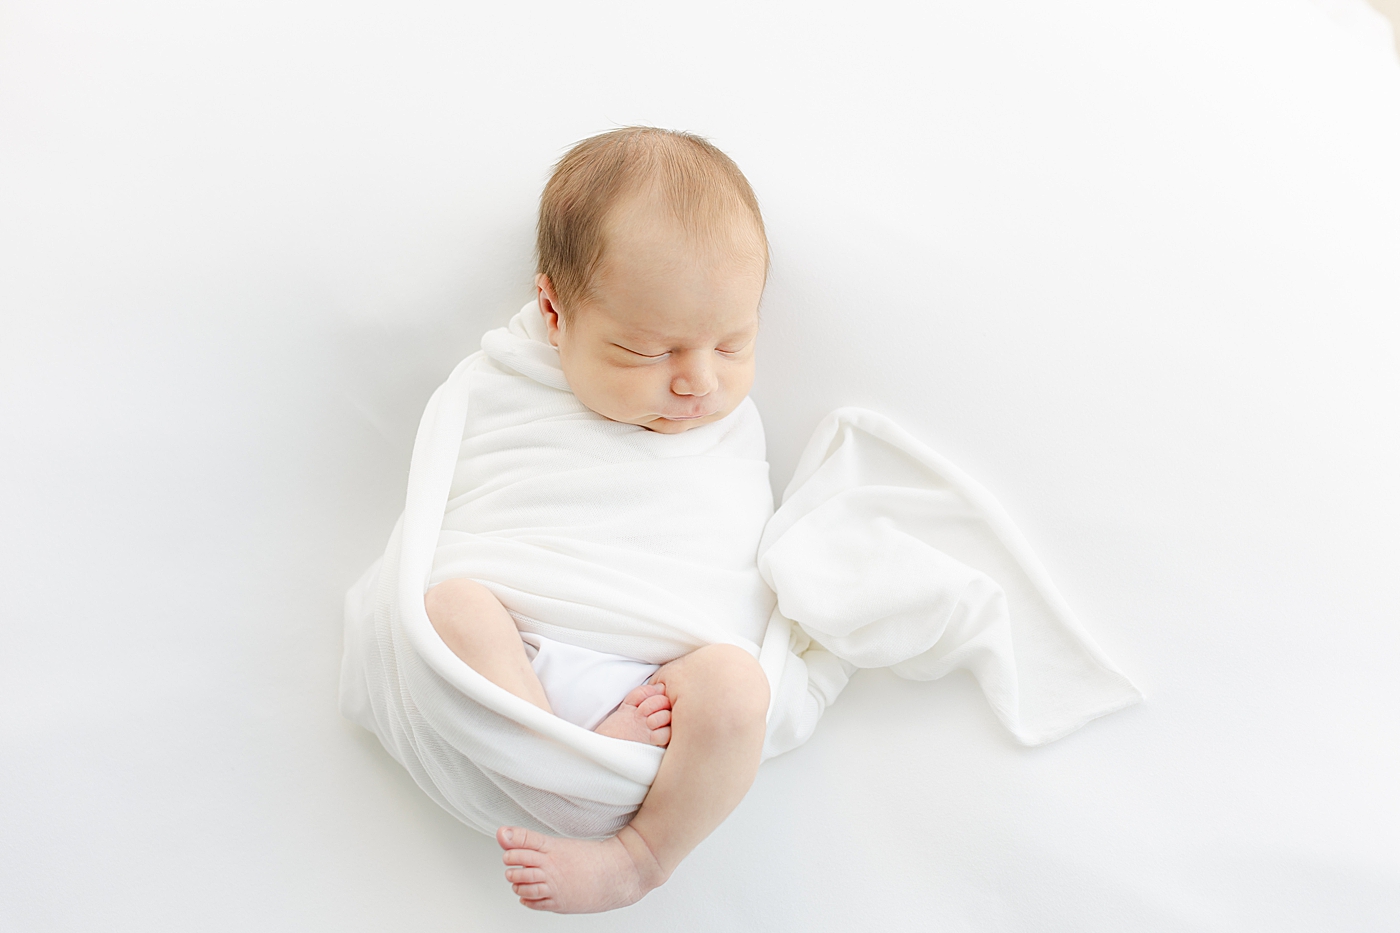 Sleeping newborn baby boy wrapped in a white swaddle | Image by Sana Ahmed Photography 